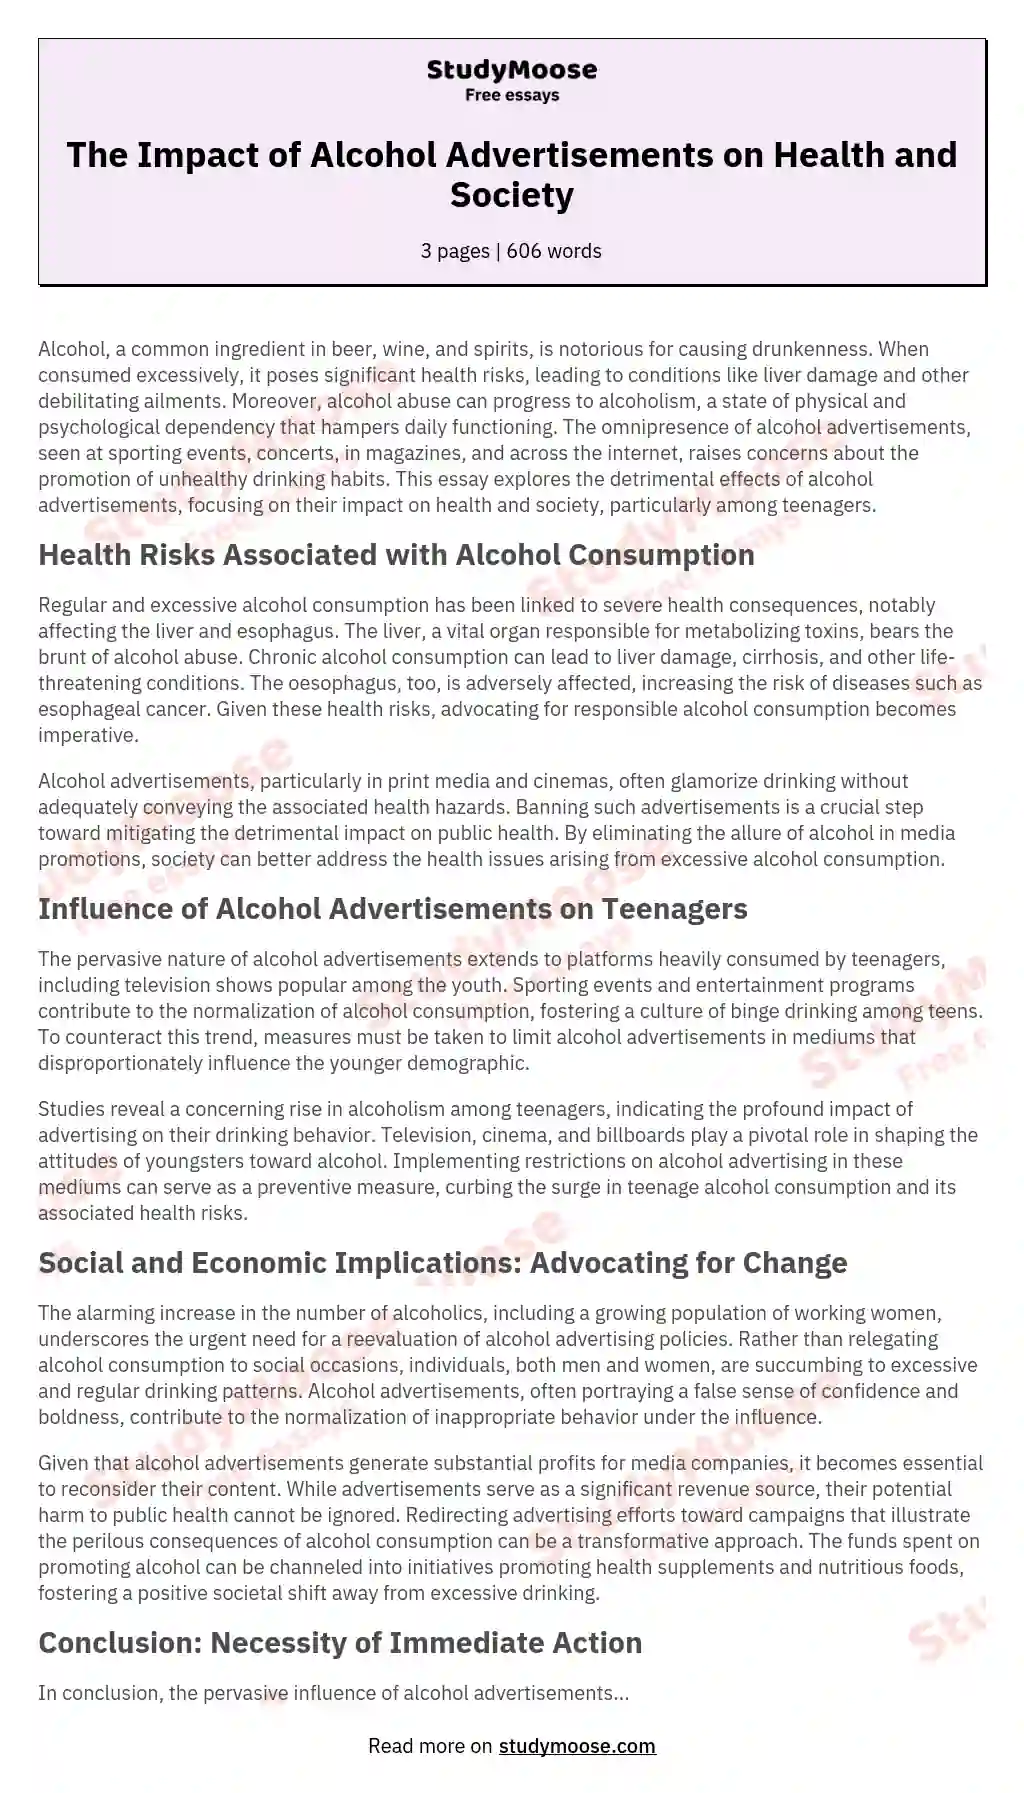 The Impact of Alcohol Advertisements on Health and Society essay